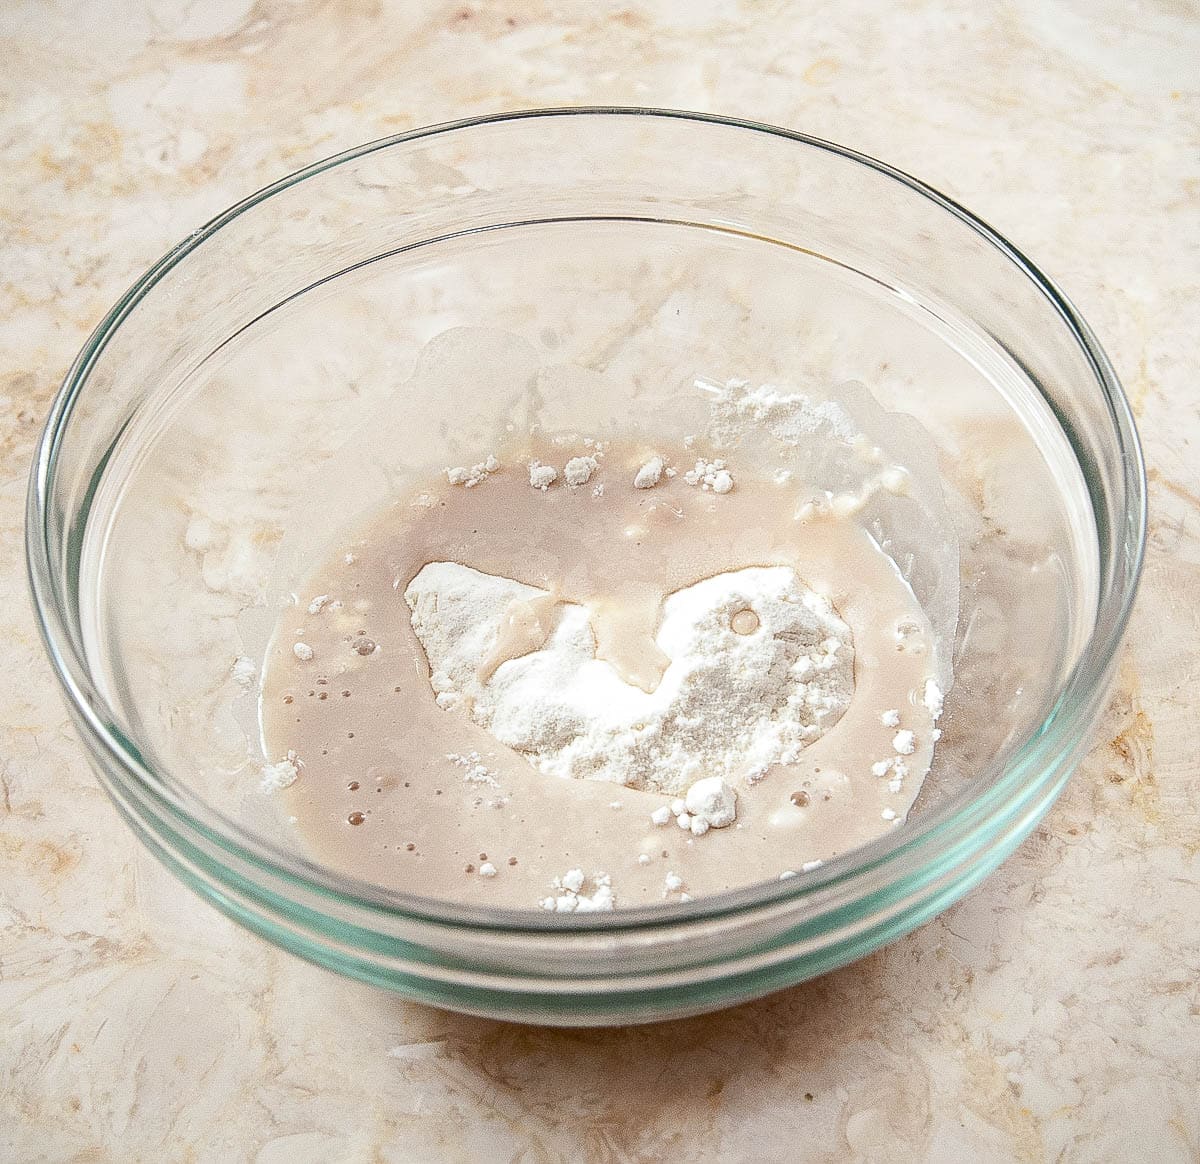 The 2 tablespoons of flour are combined in a bowl with the yeast, water and a pinch of sugar.